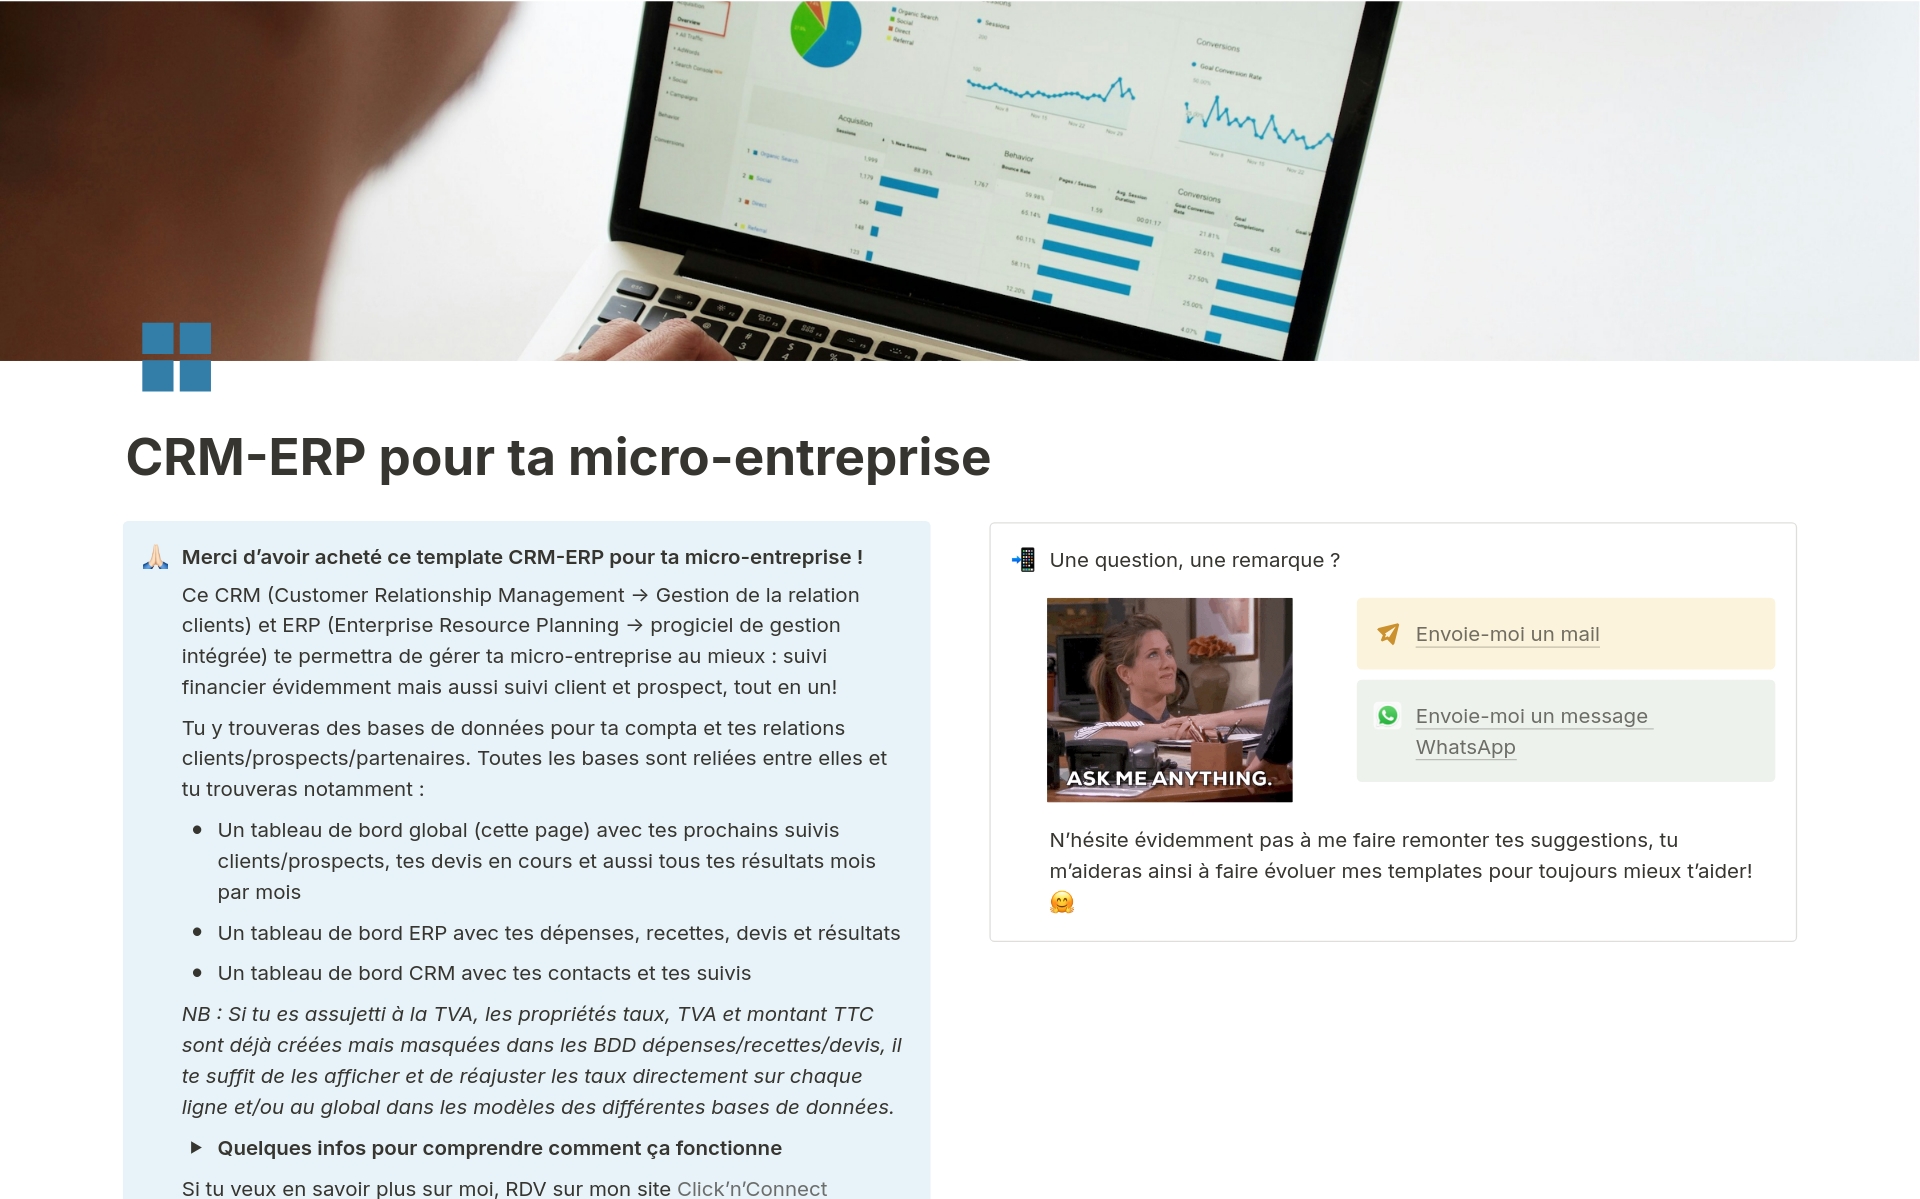 A template preview for CRM-ERP pour ta micro-entreprise